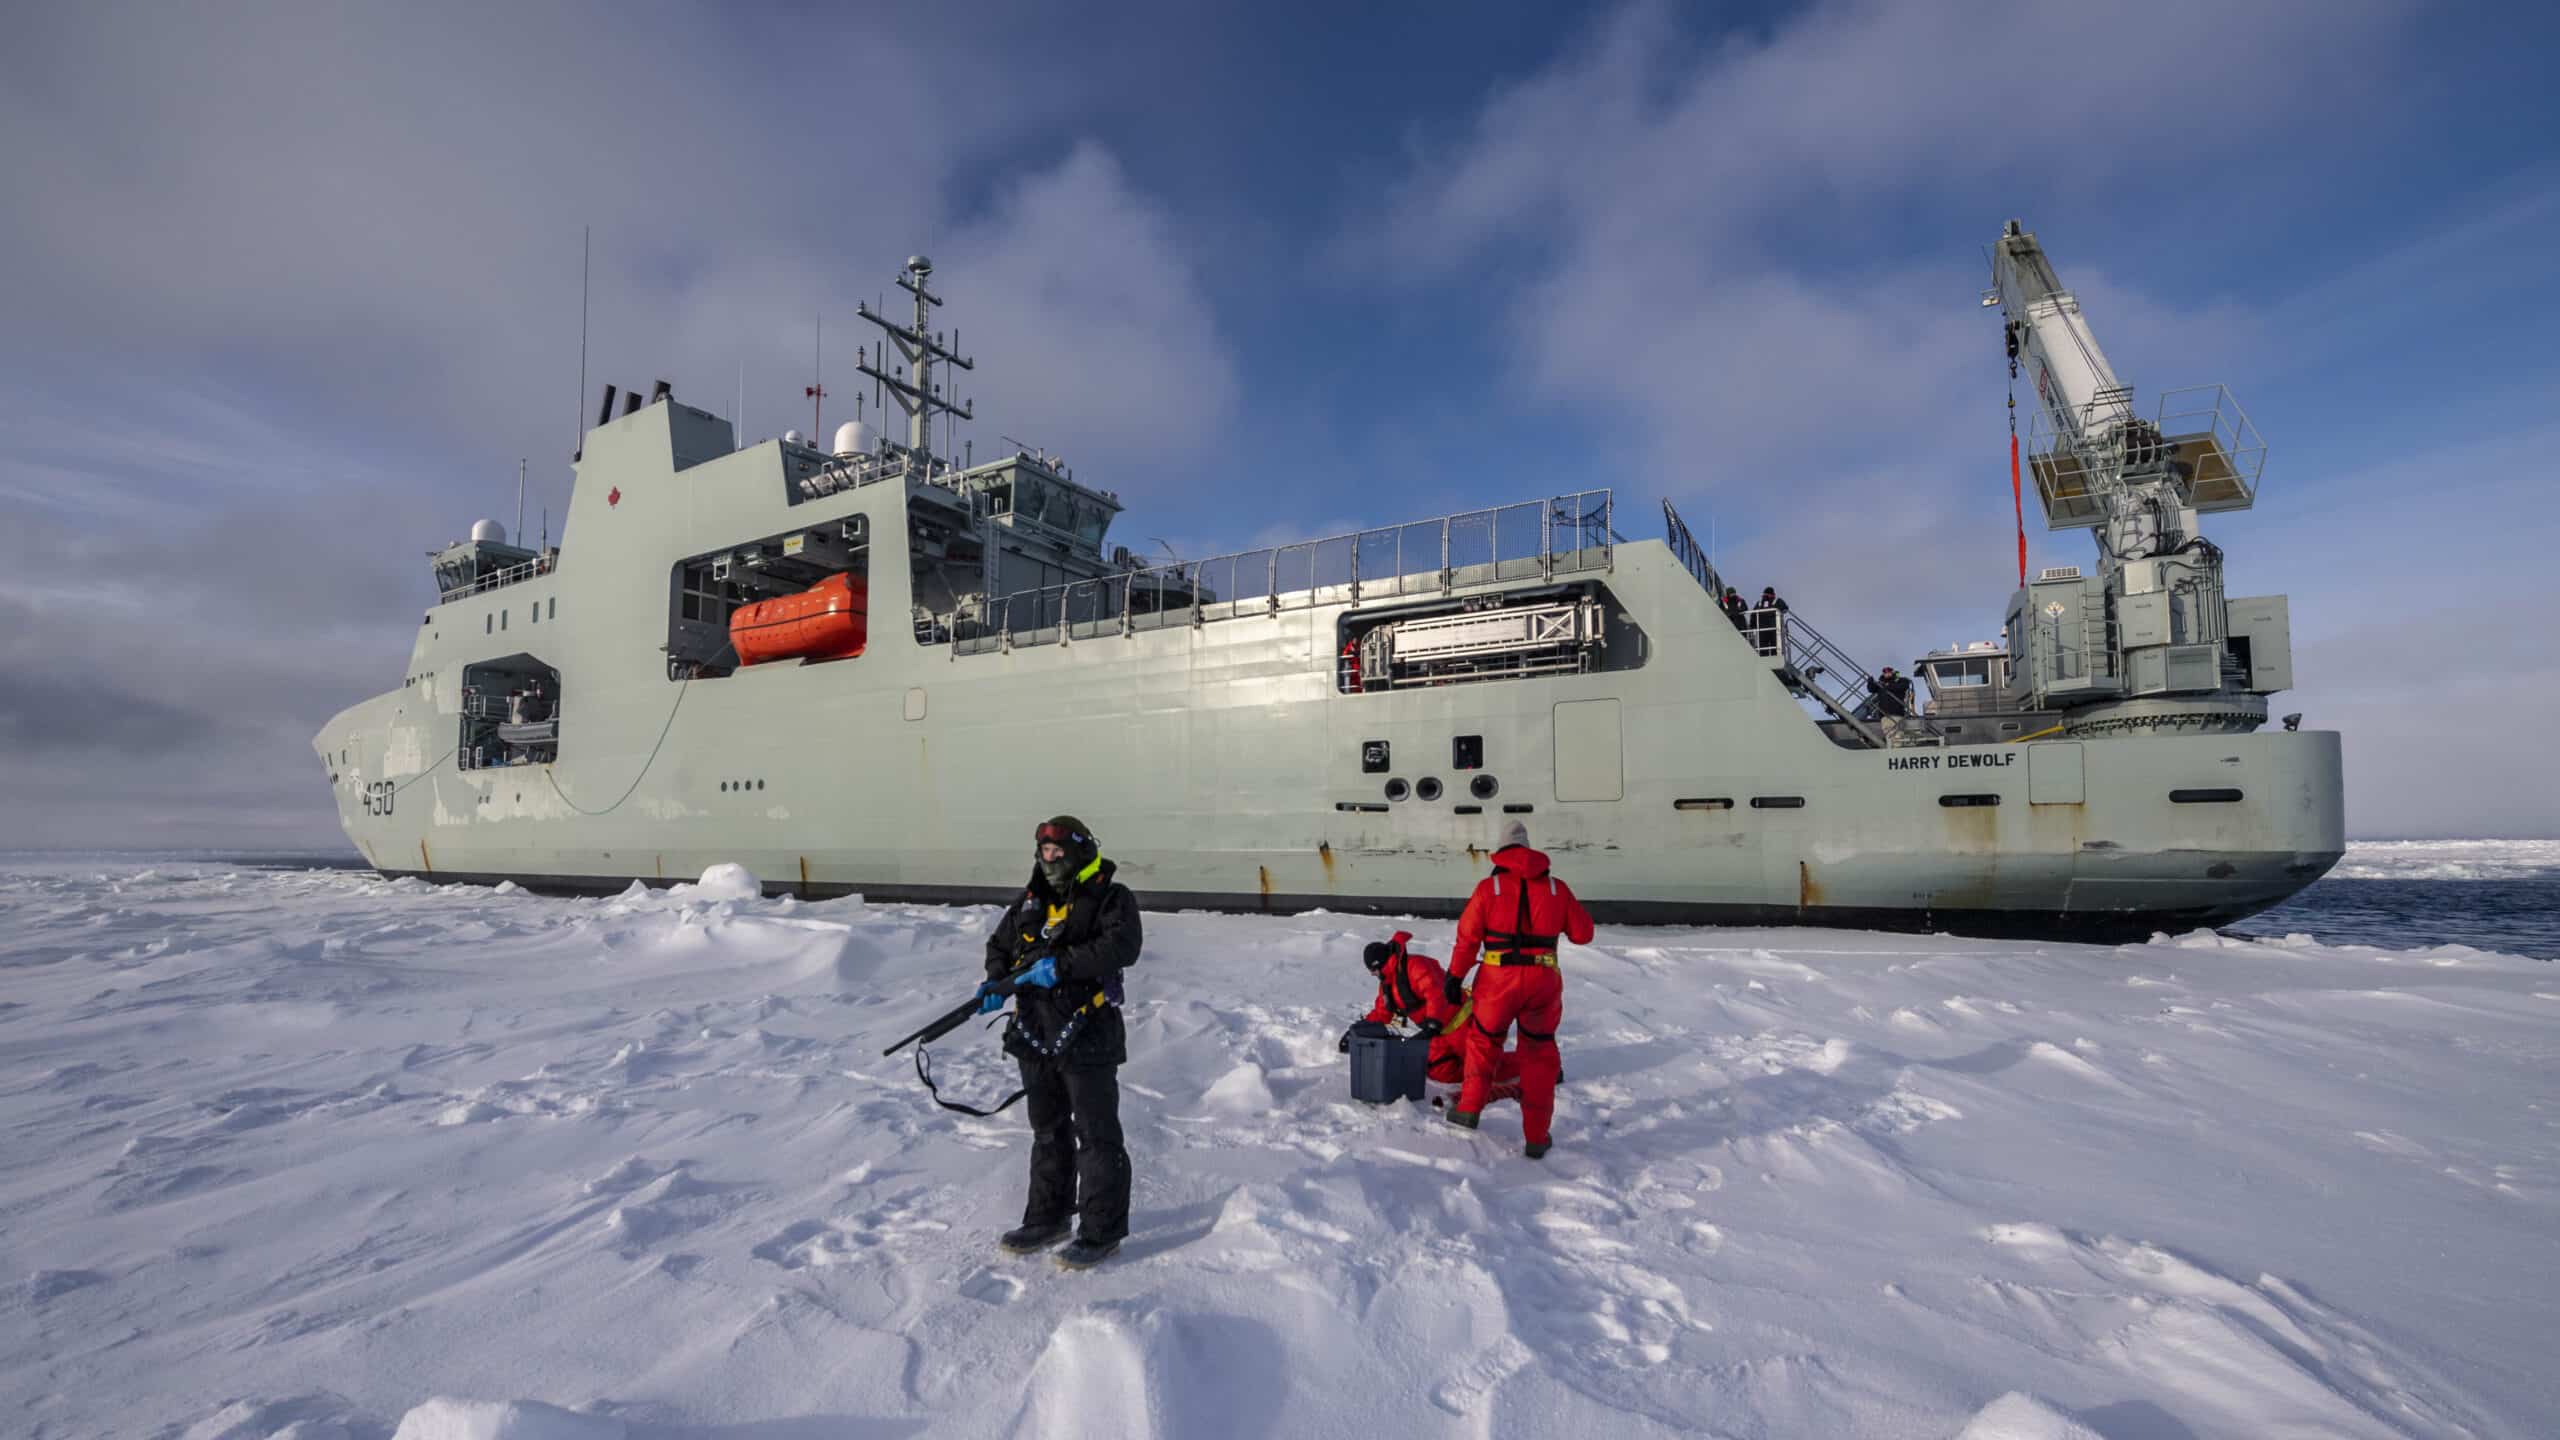 Royal Canadian Navy military ship in the Arctic, next to snow and man holding a gun